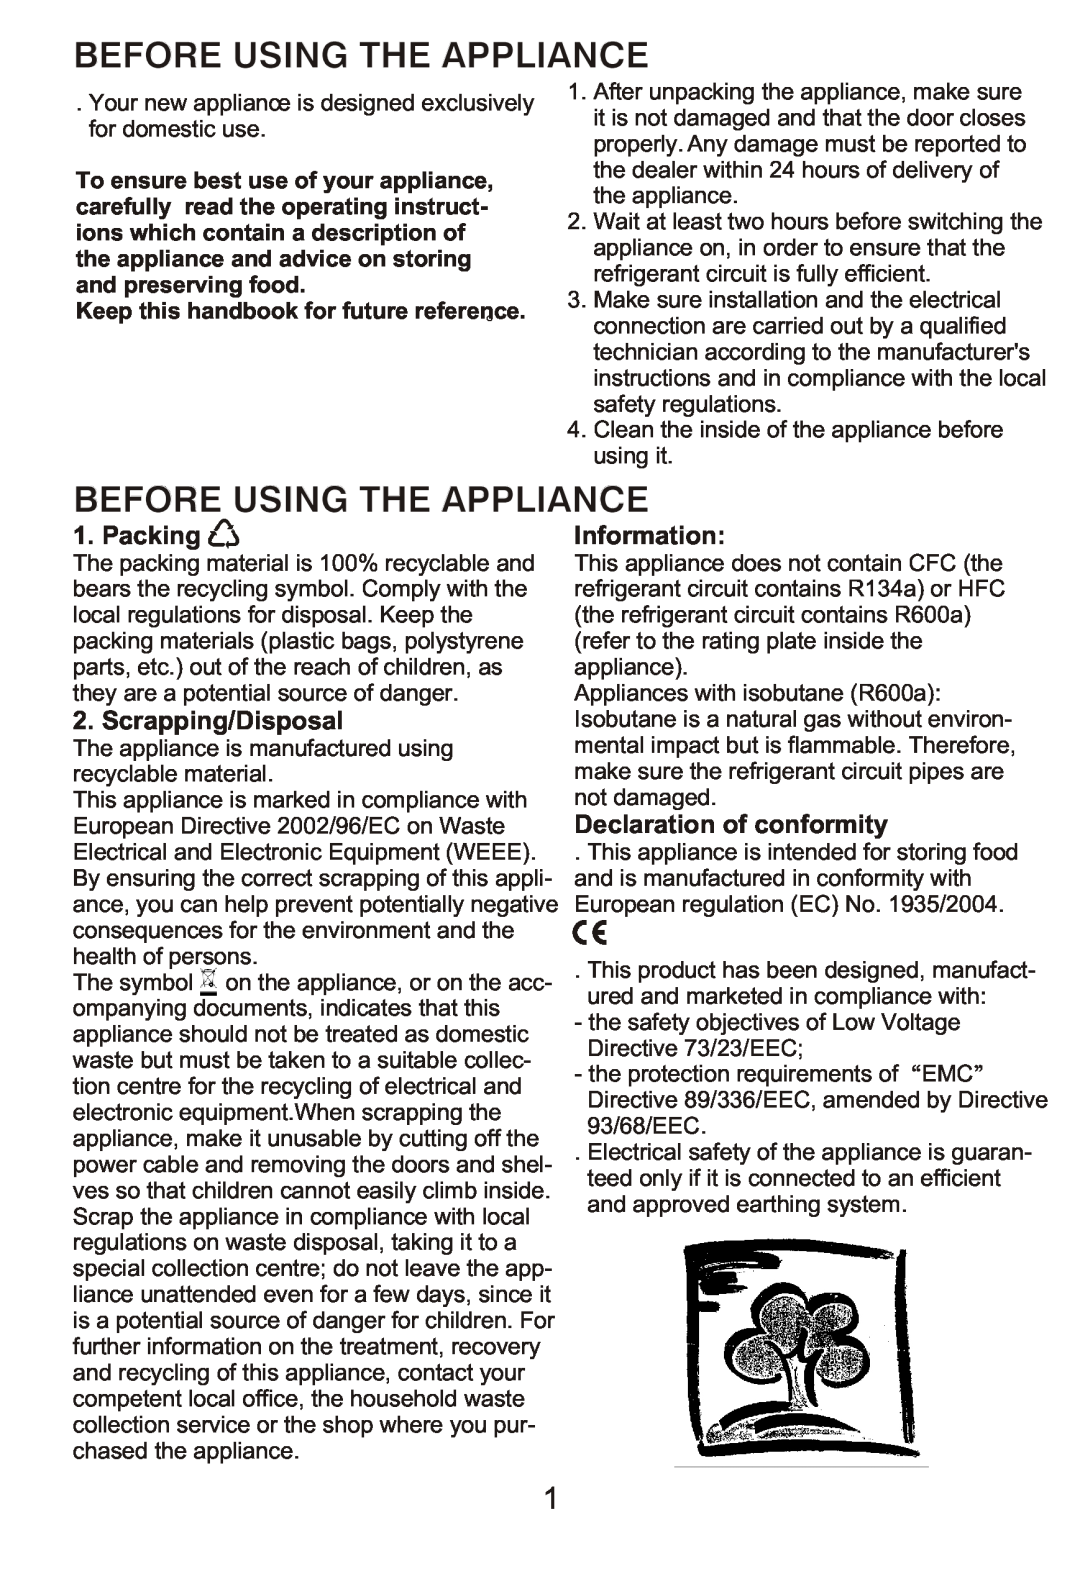 Hoover HWC 2536DL instruction manual Packing, Scrapping/Disposal, Information, Declaration of conformity 